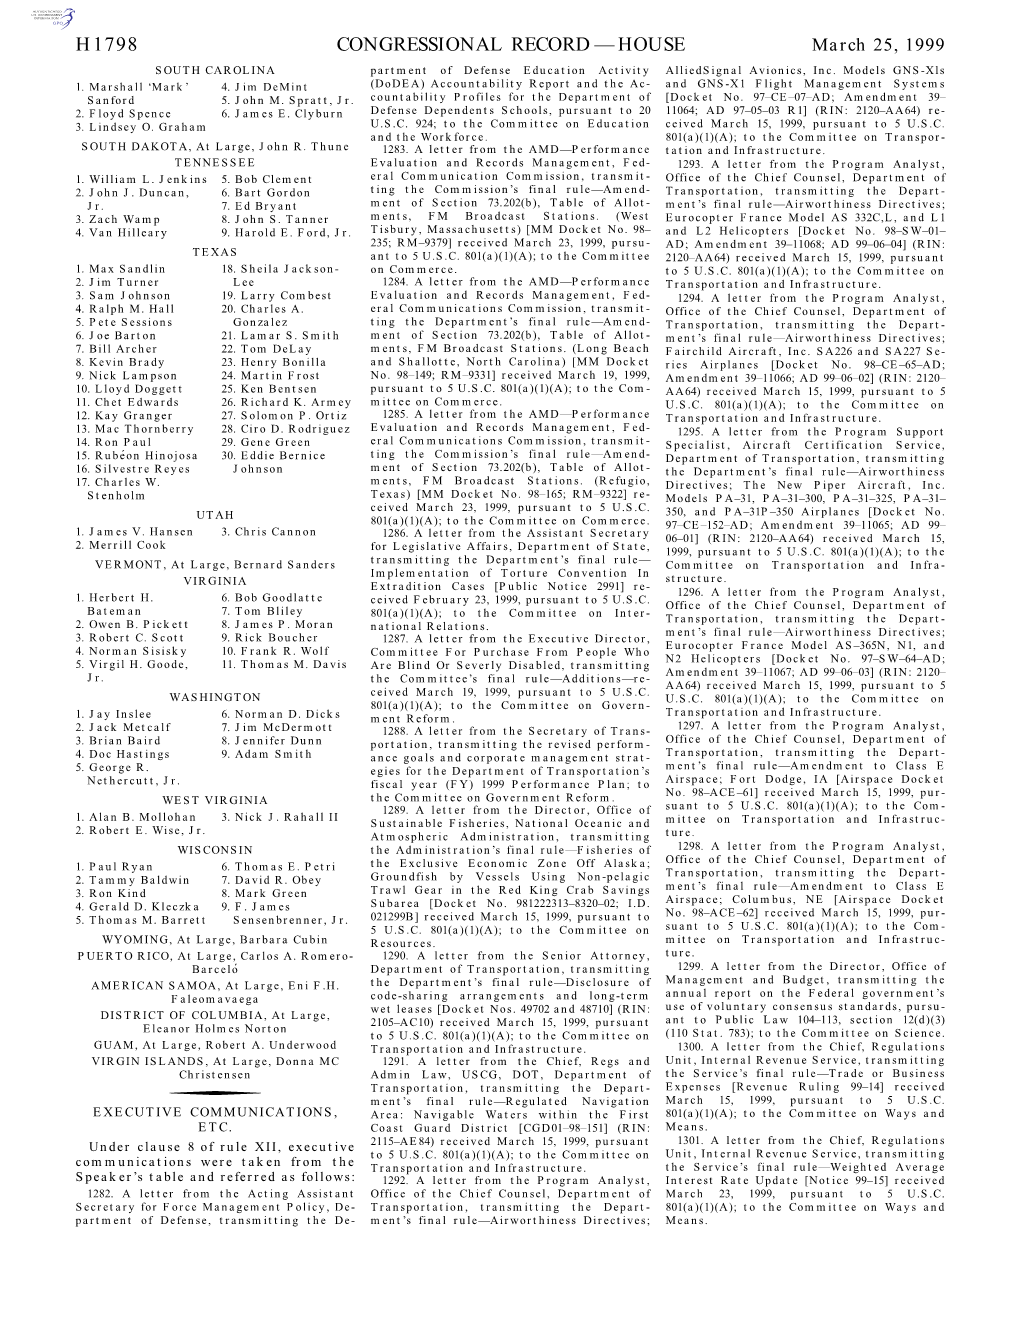 Congressional Record—House H1798